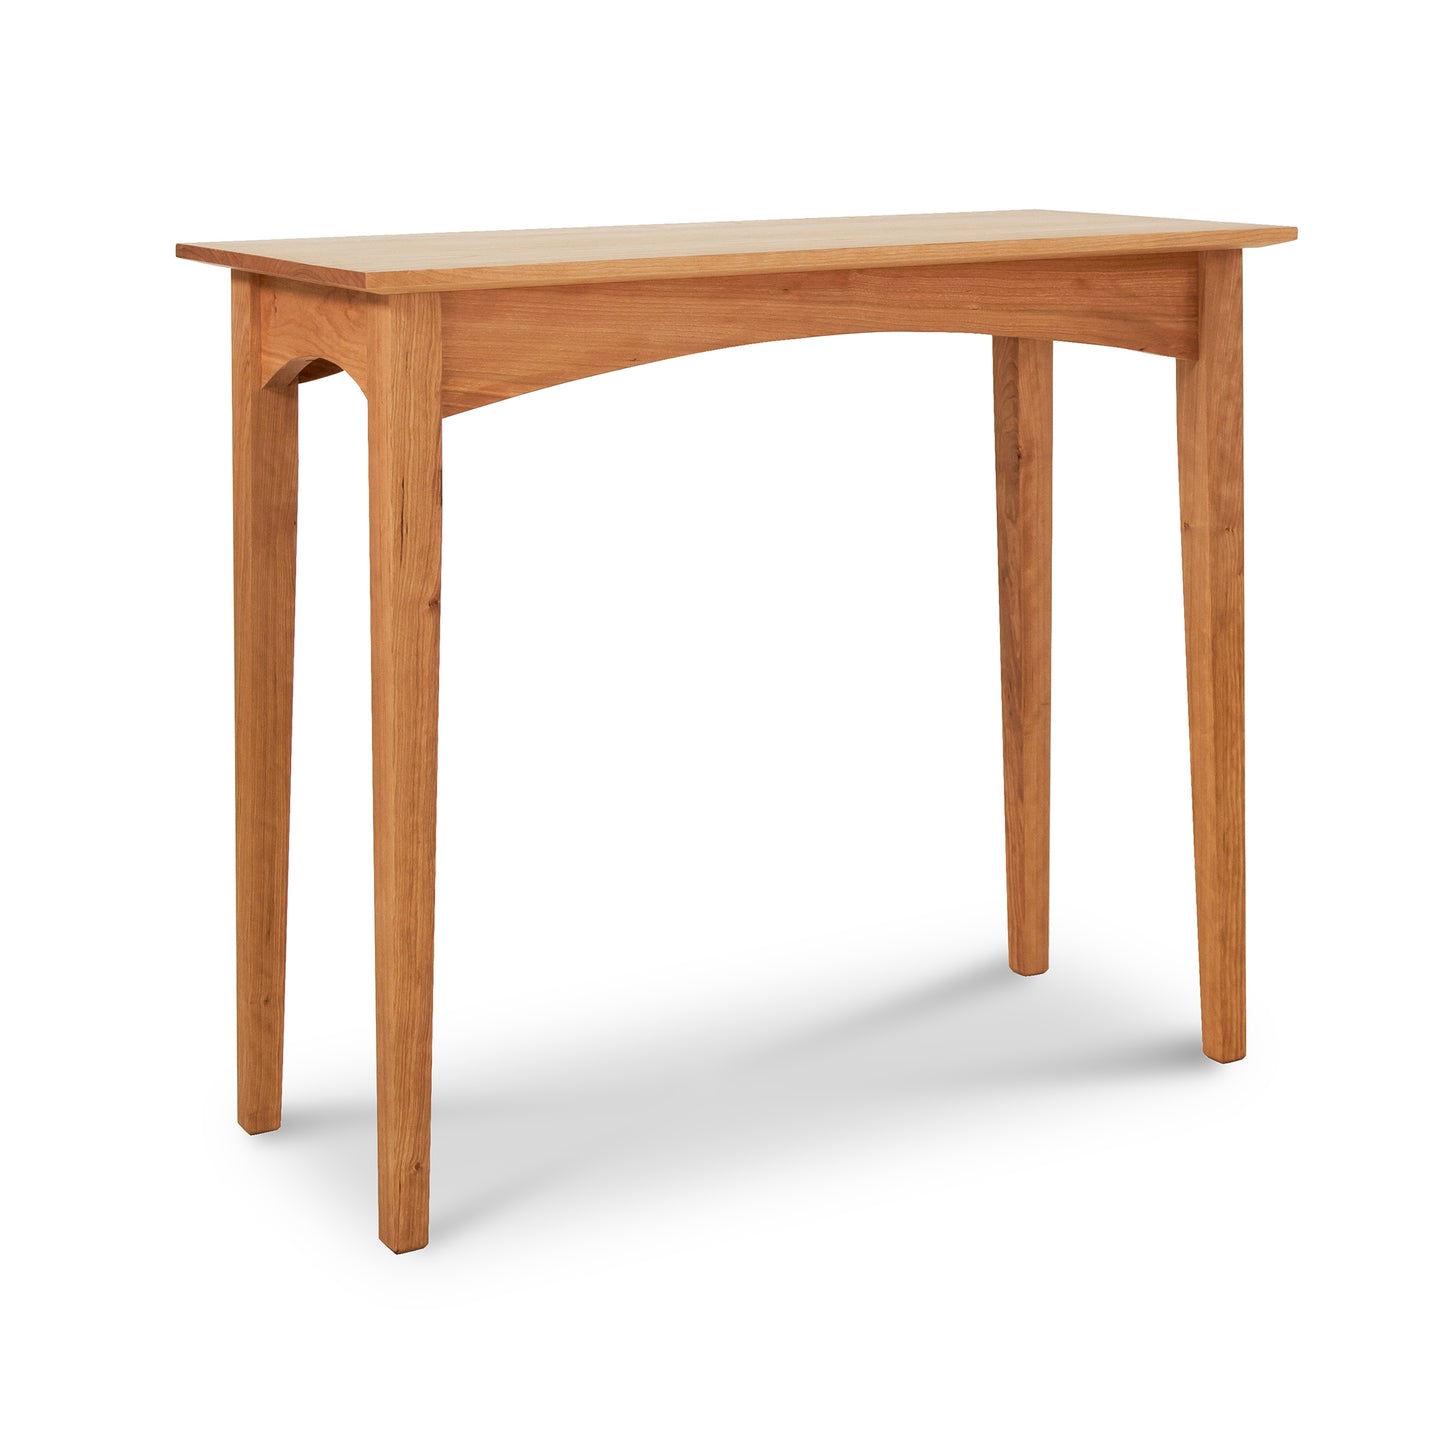 A Maple Corner Woodworks American Shaker Sofa Table with a simple design and four legs, isolated on a white background.